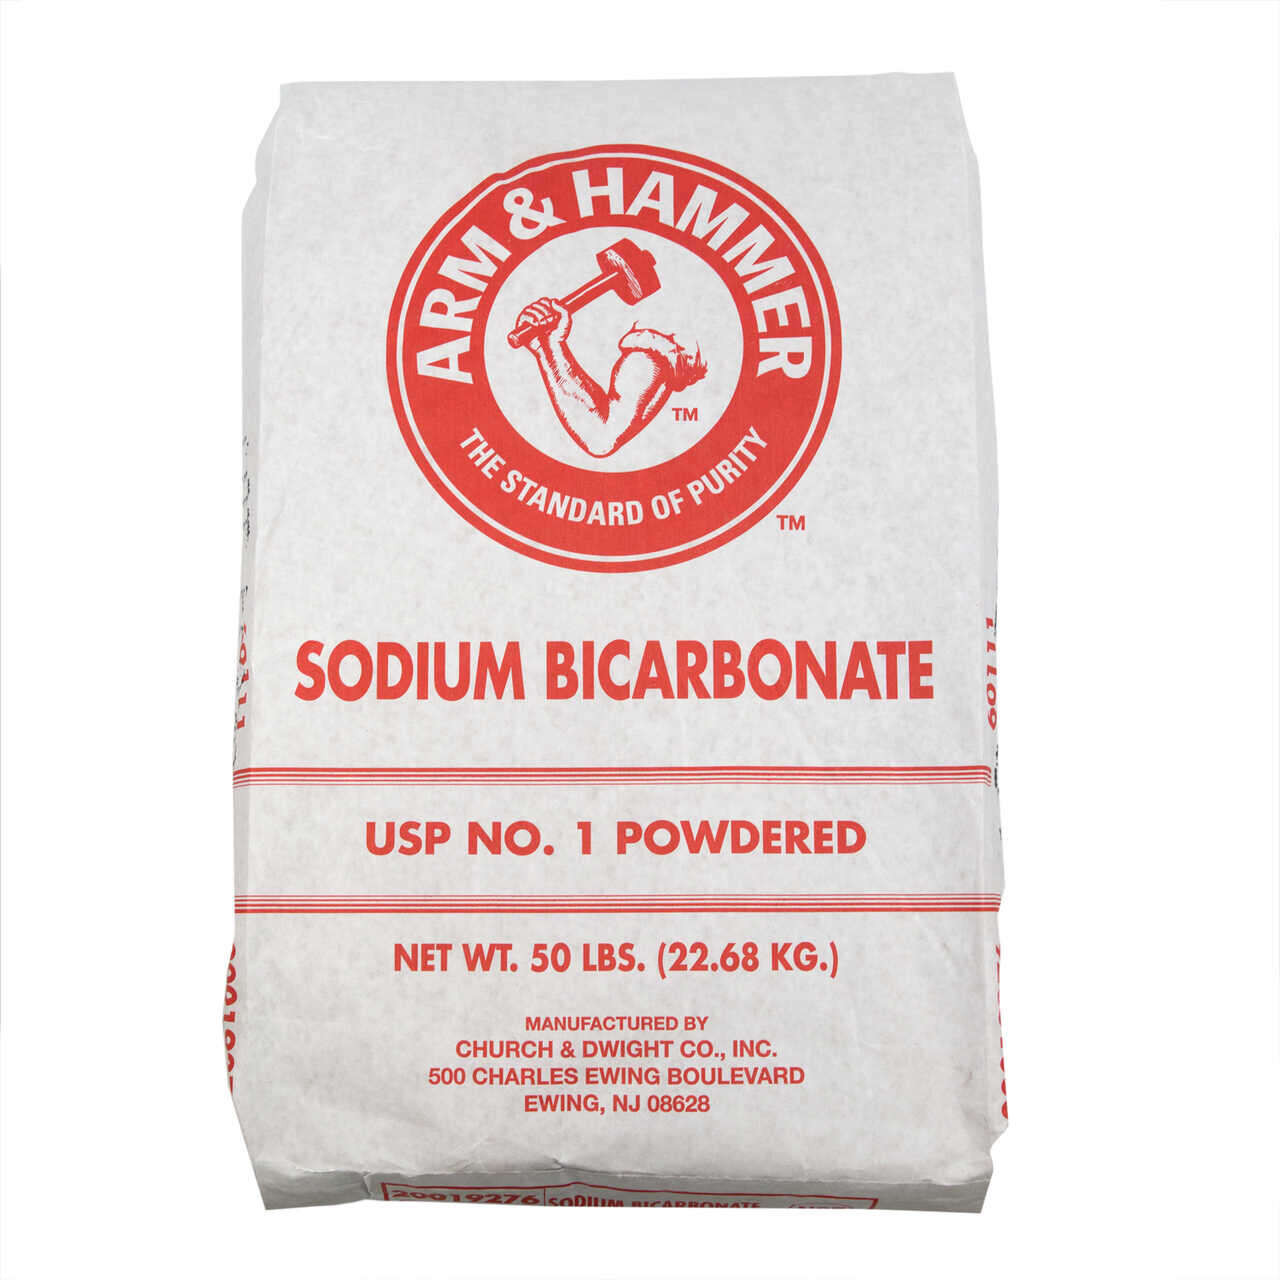 Sodium bicarbonate, cheap and effective?